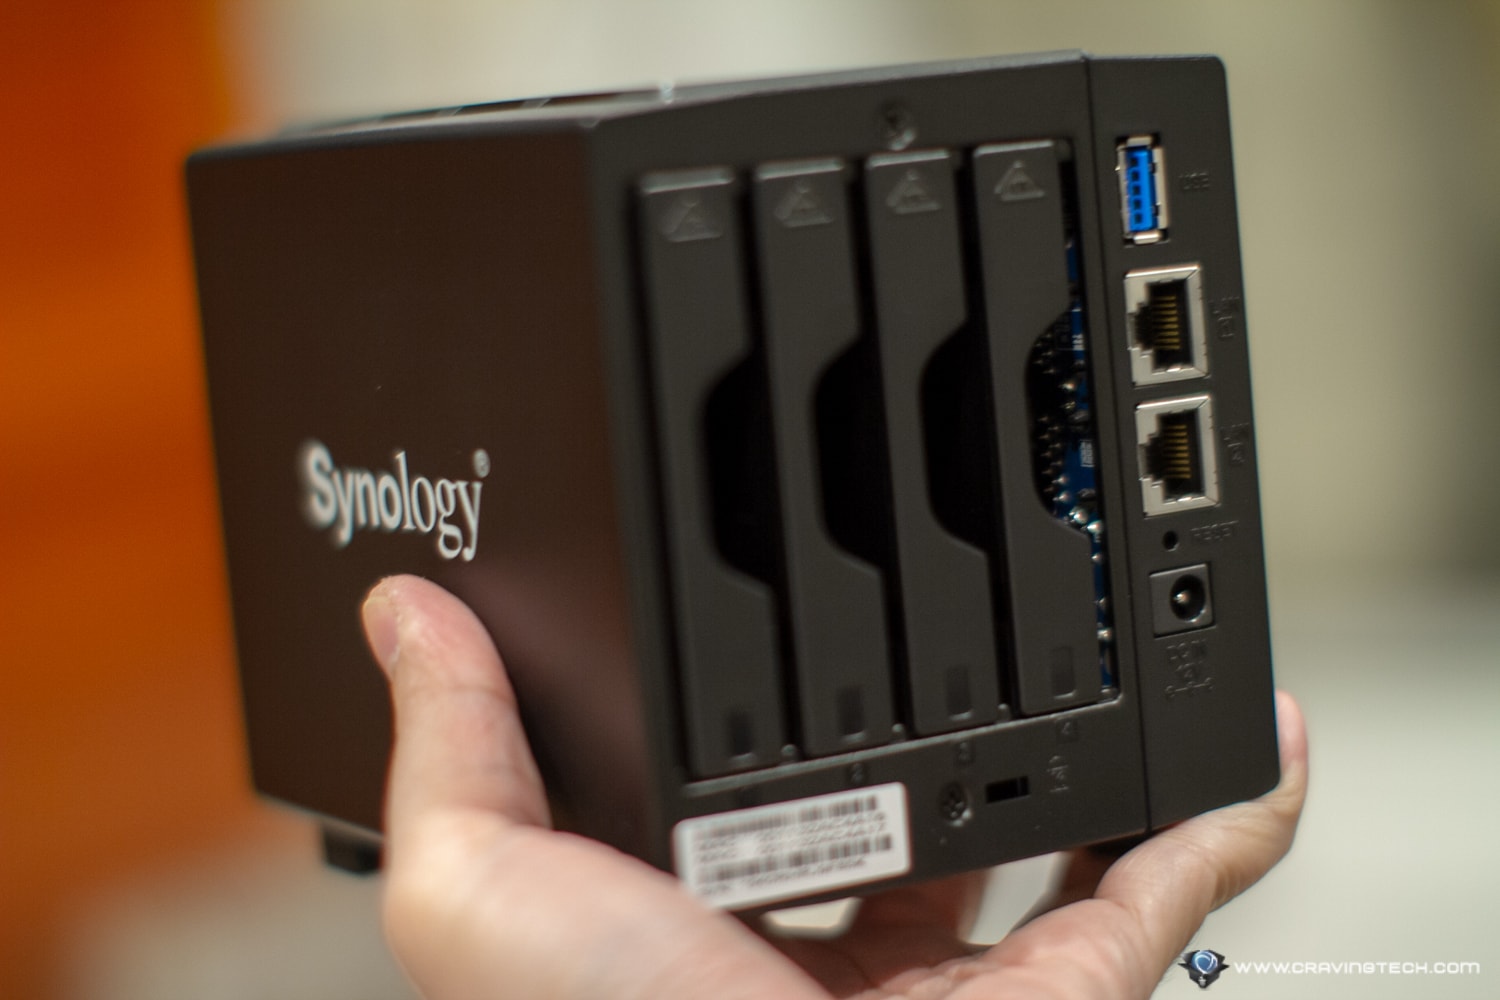 Synology DiskStation DS419slim compact NAS